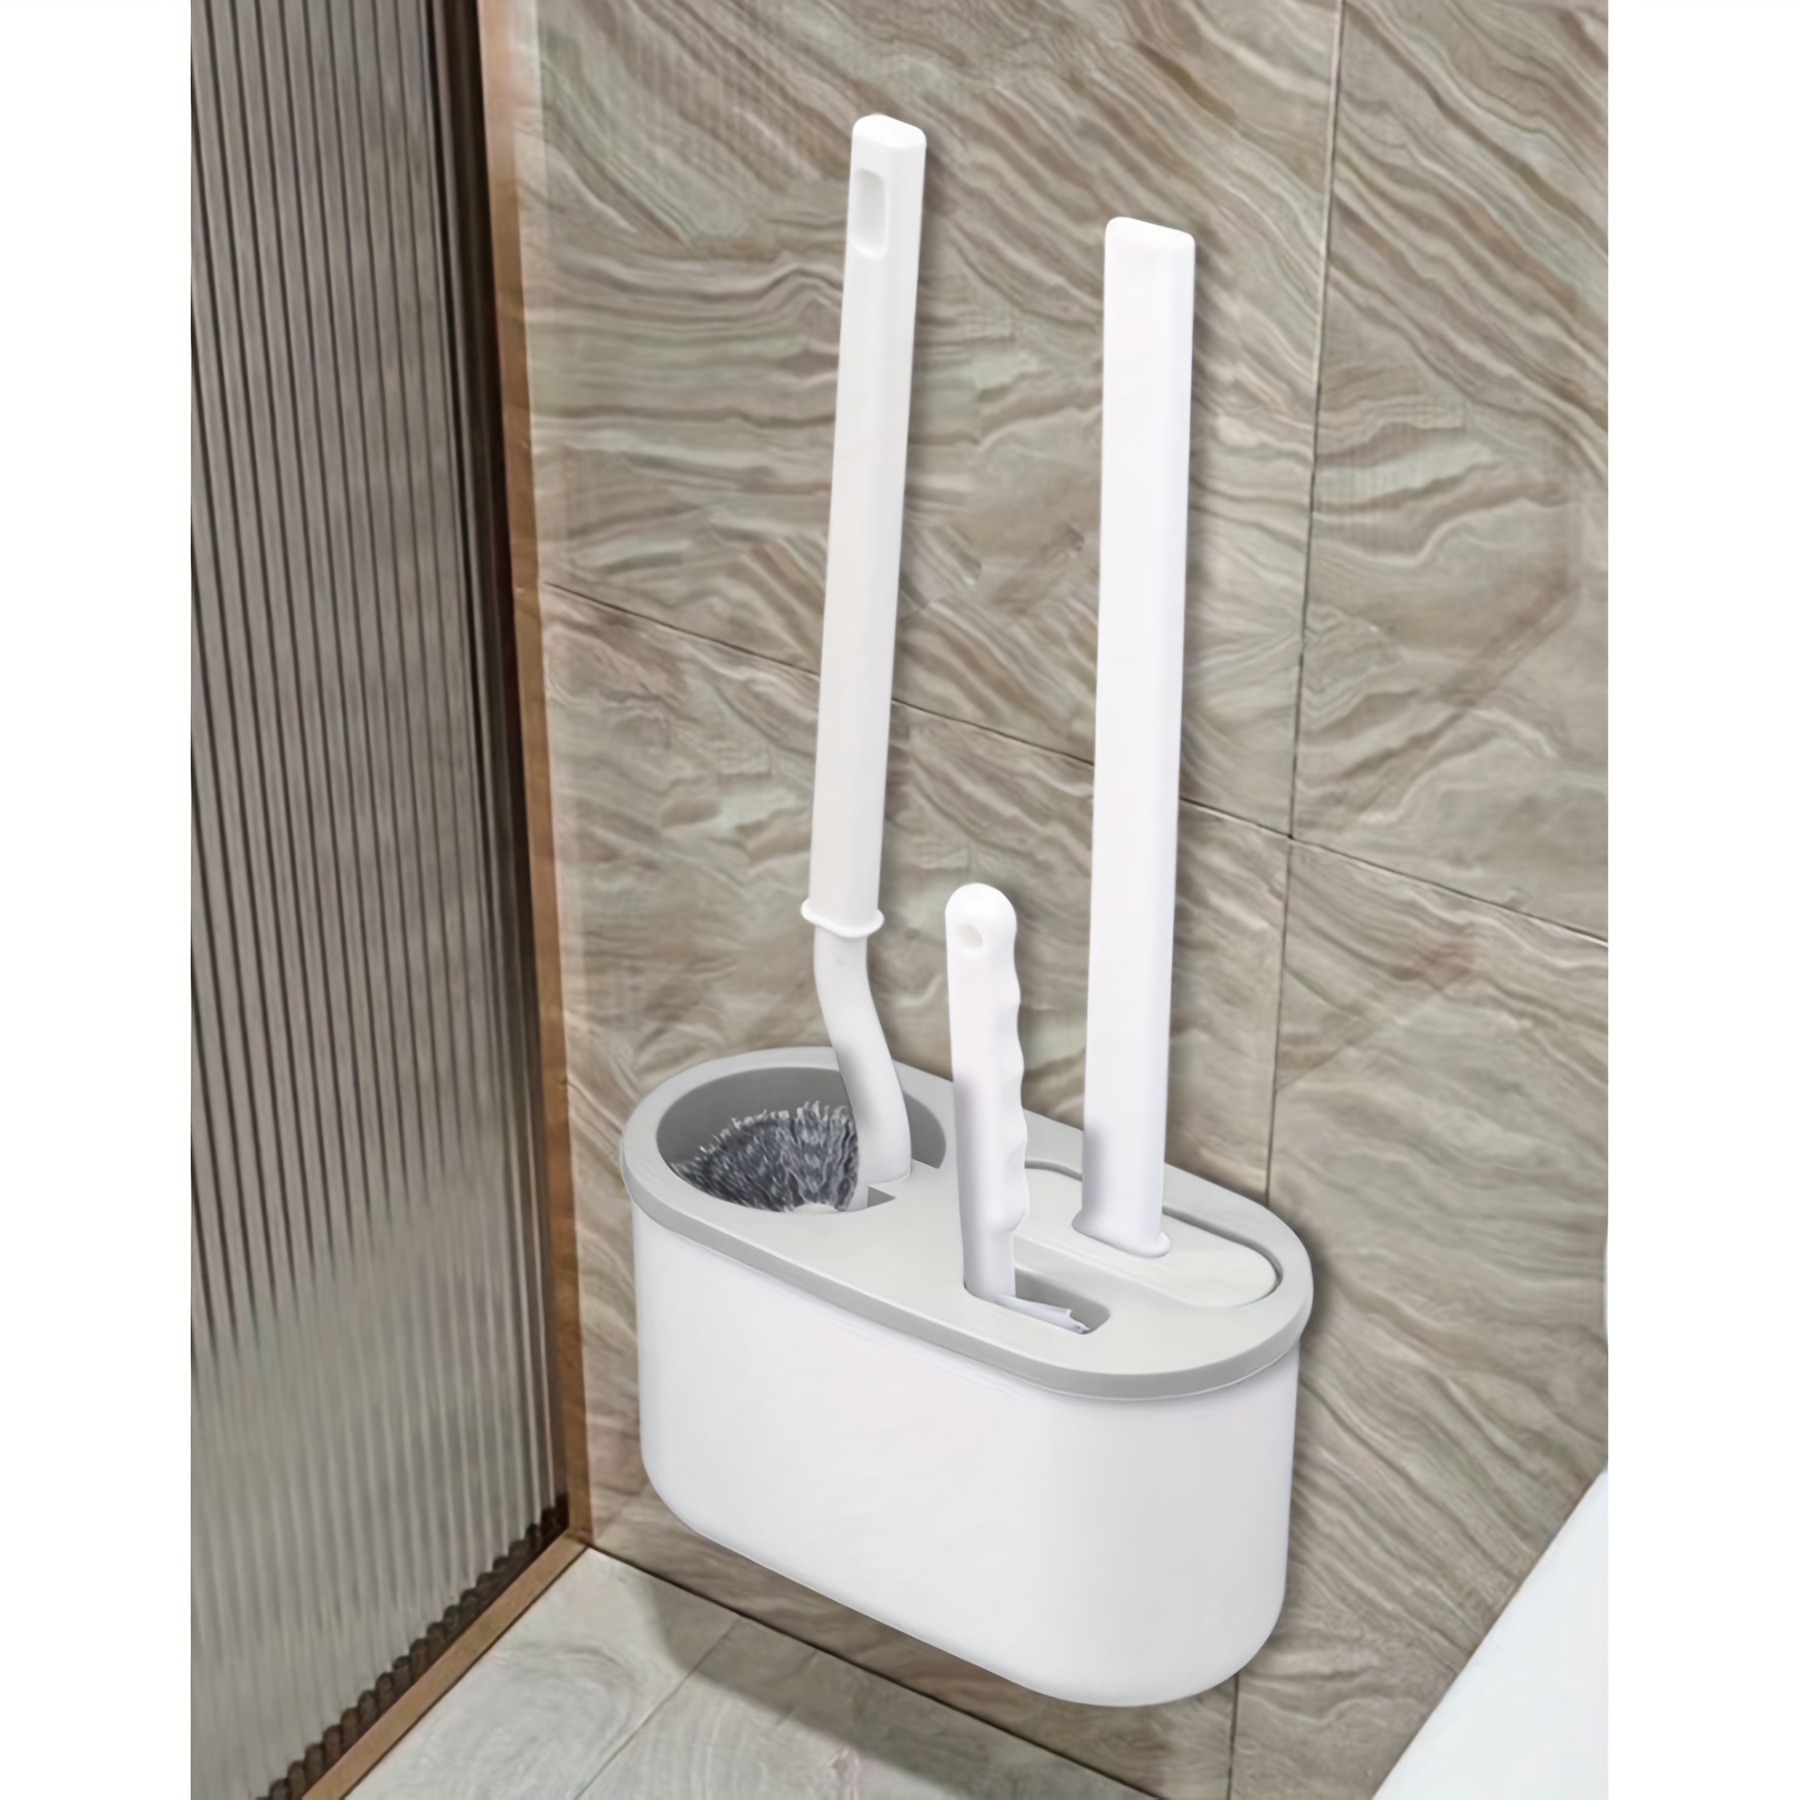 

Toilet Cleaning Brush Set With Long Handle, Wall-mounted Holder Box - Durable Pvc Household Scrubbing Tool For Bathroom/toilet, No Electricity Needed, Multi-component Grip Design - 3pcs